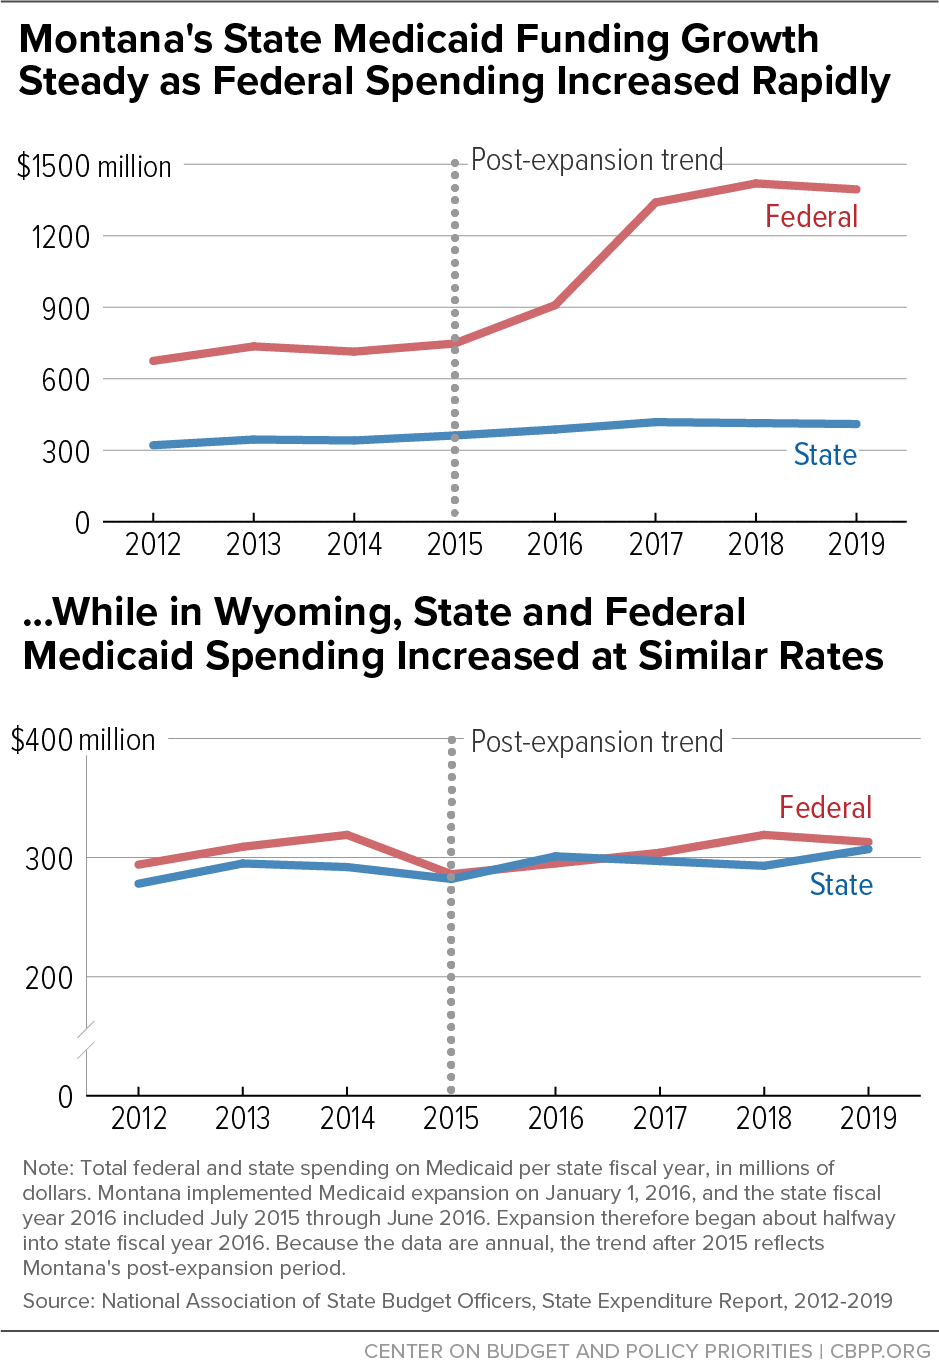 Montana's State Medicaid Funding Growth Steady as Federal Spending Increased Rapidly